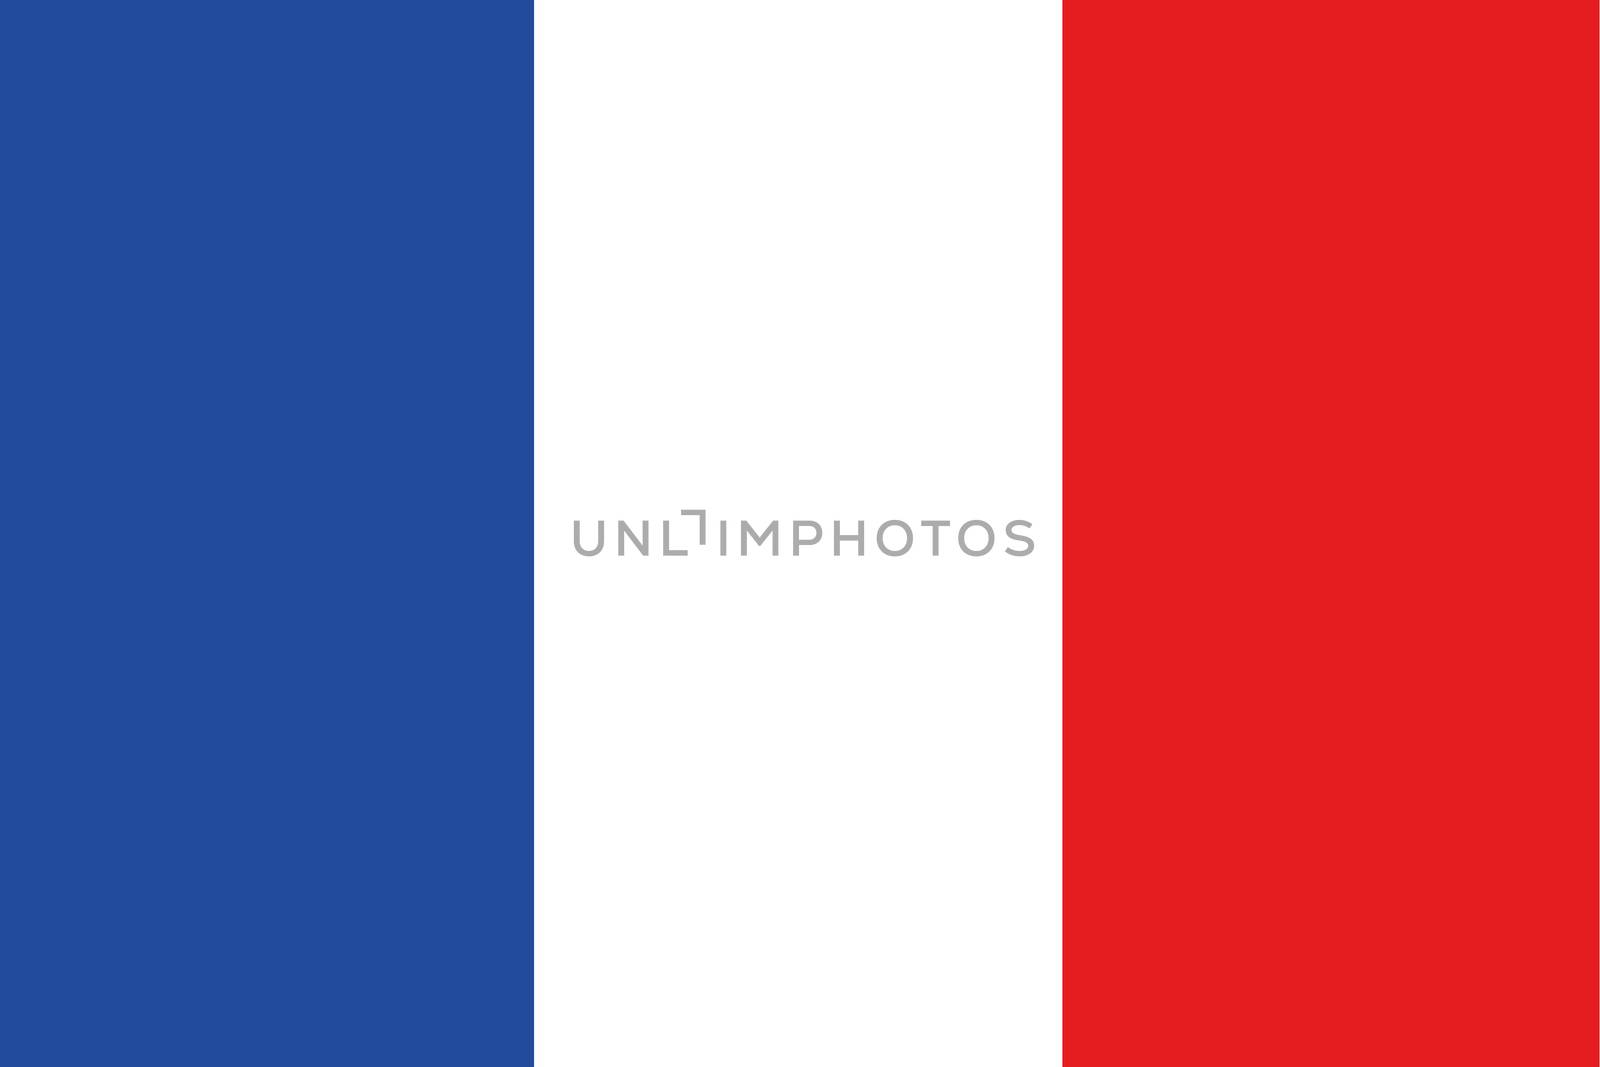 An illustration of the flag of France